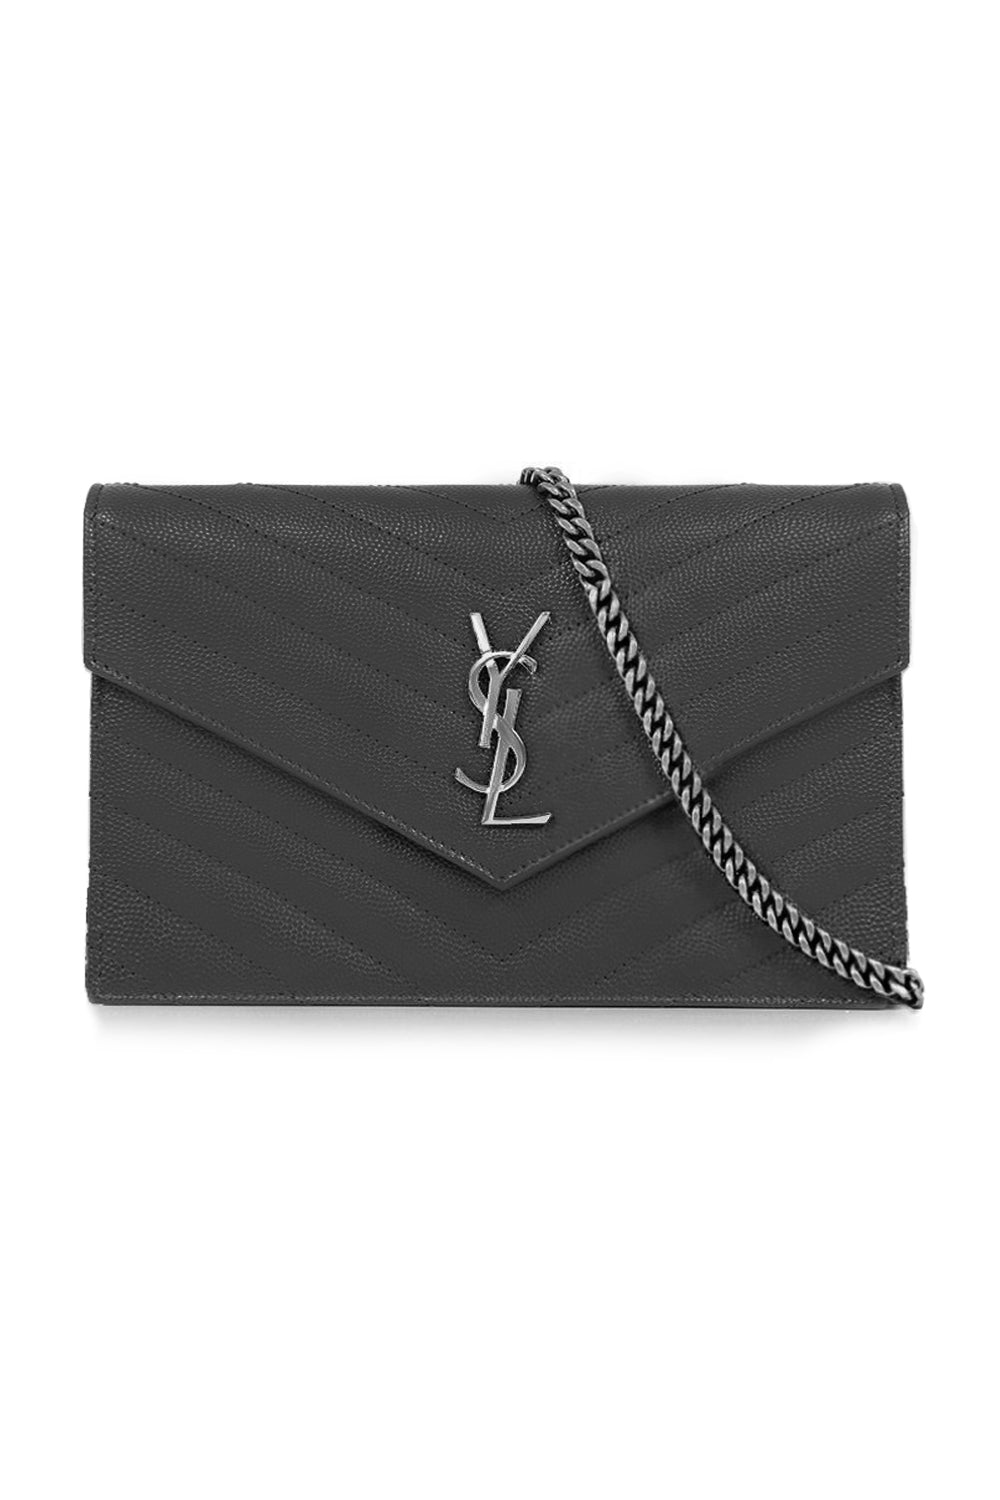 SAINT LAURENT BAGS GREY SMALL MONOGRAMME QUILTED CHAIN WALLET | STORM/SILVER